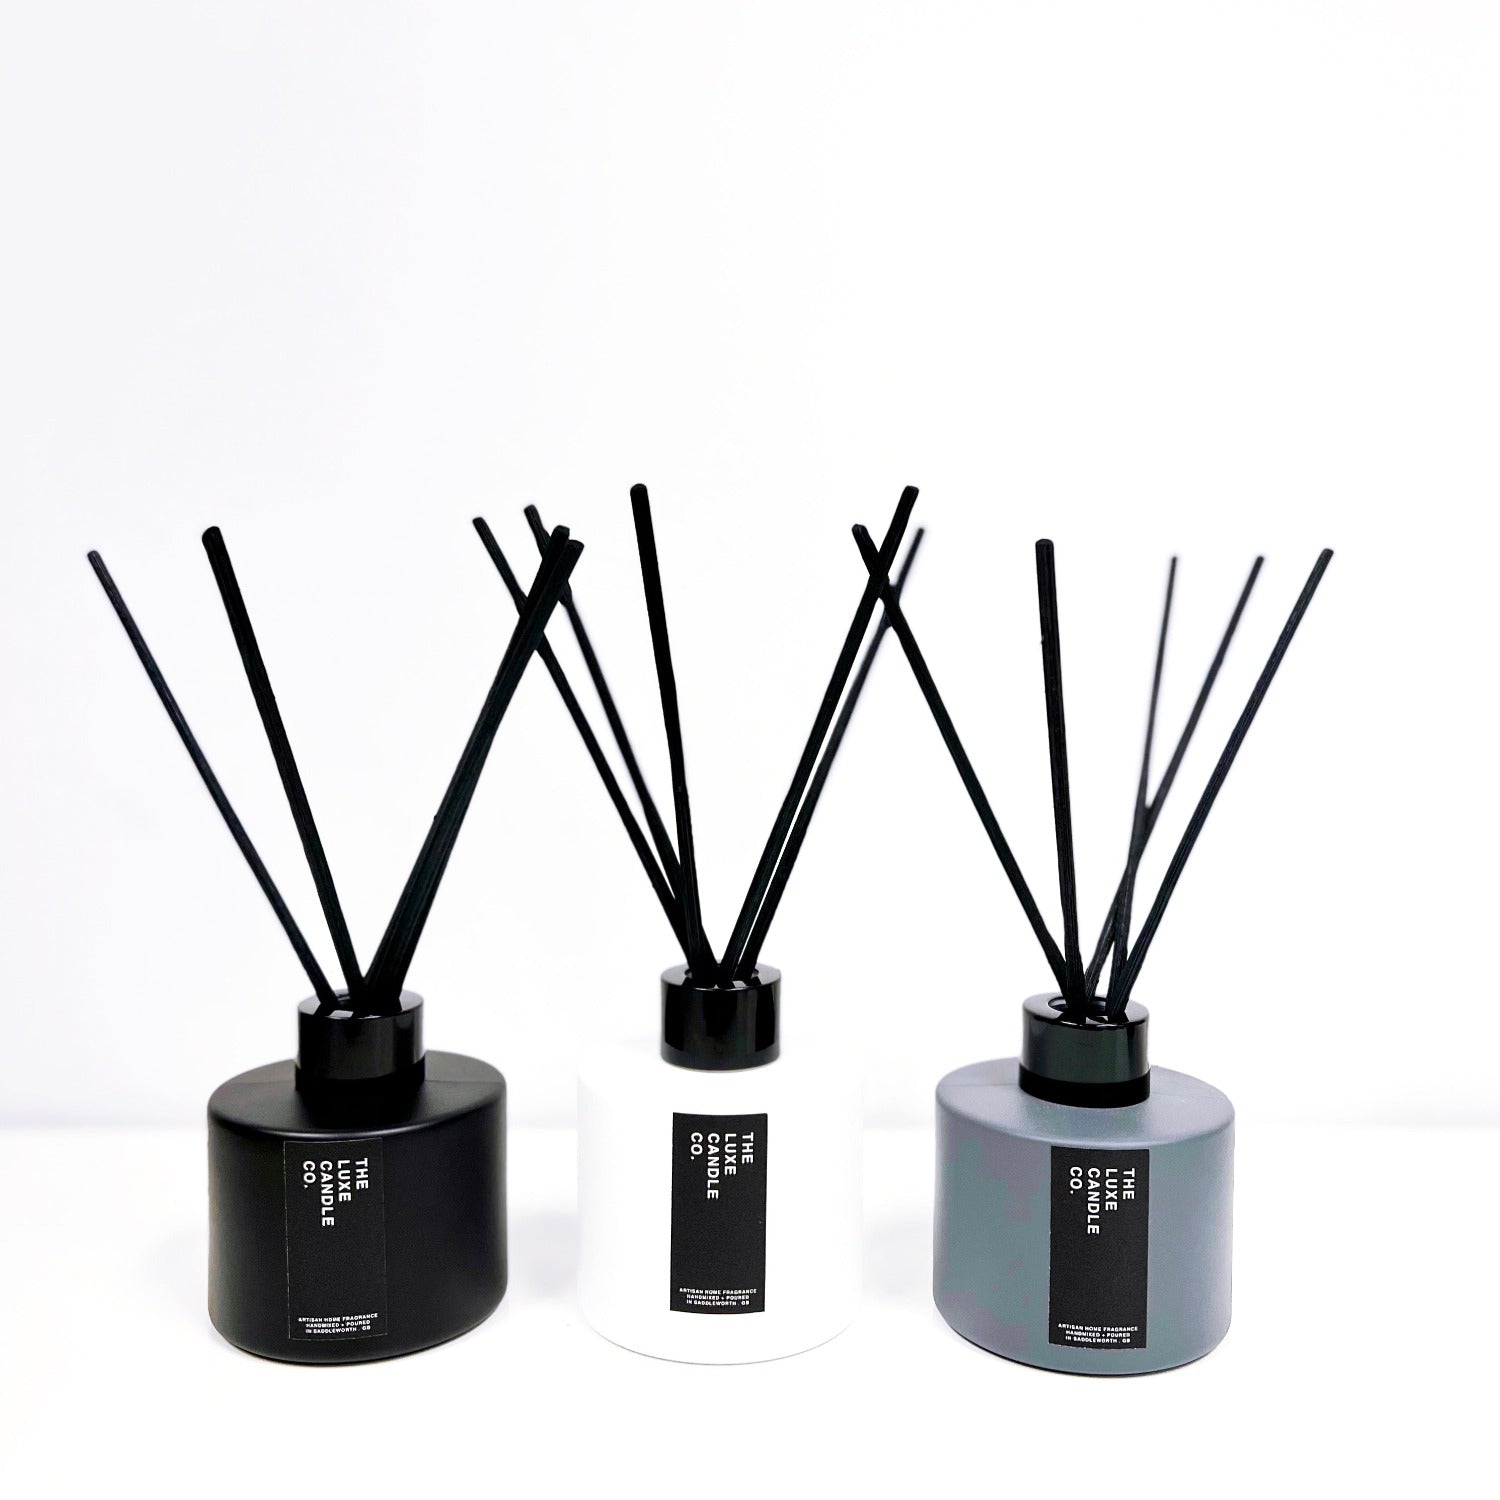 Coconut reed diffuser gift set with white reed diffuser | Best gift idea for coconut lover UK